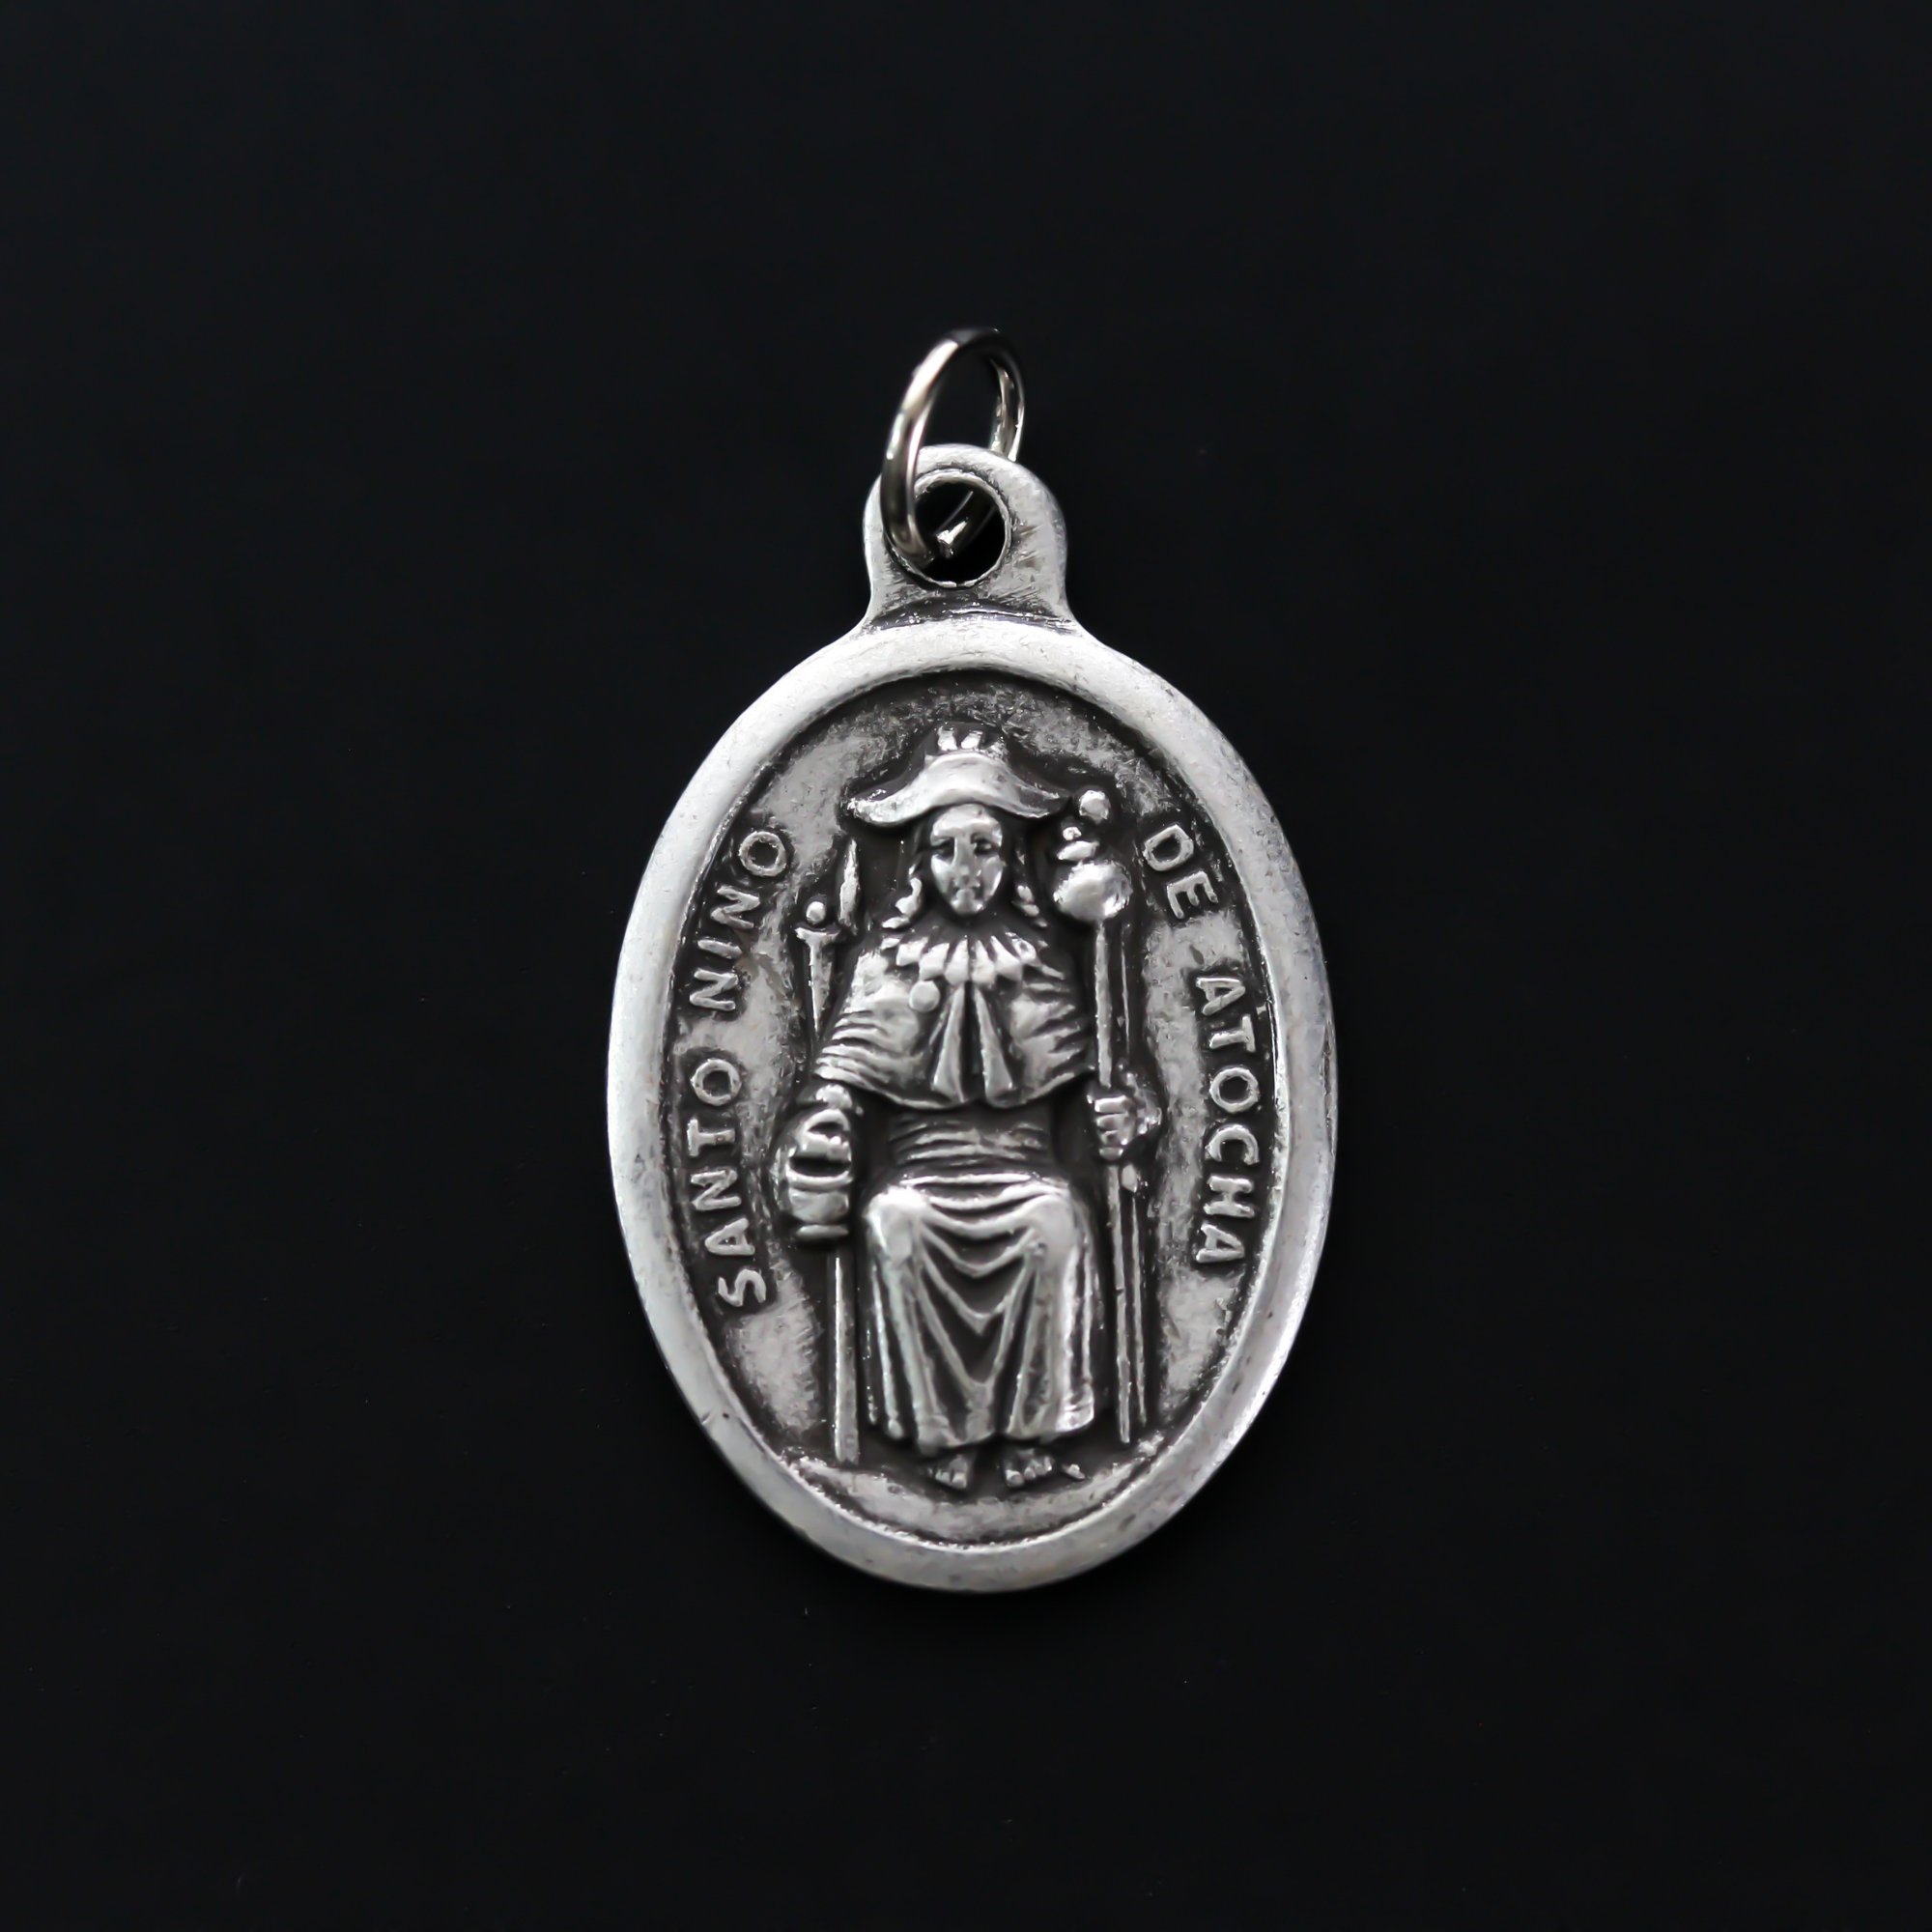 Santo Nino de Atocha medal that is marked "Pray For Us" on the reverse side